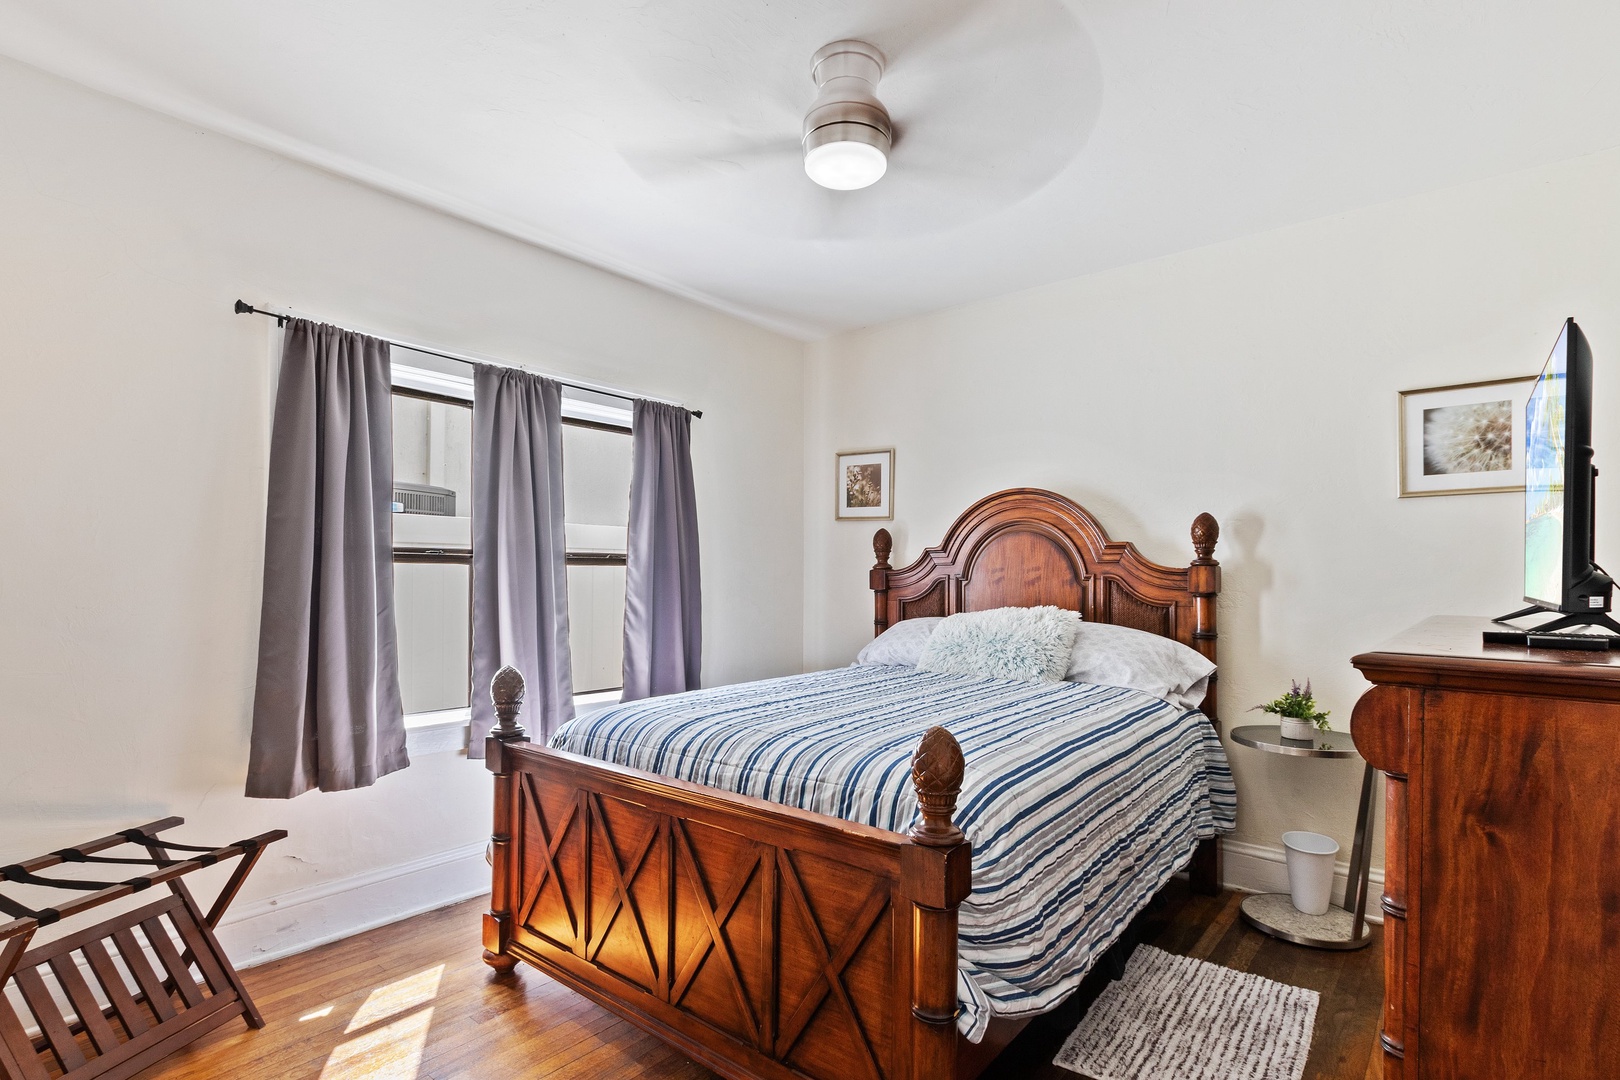 The first of three bedrooms offers a regal queen bed & TV